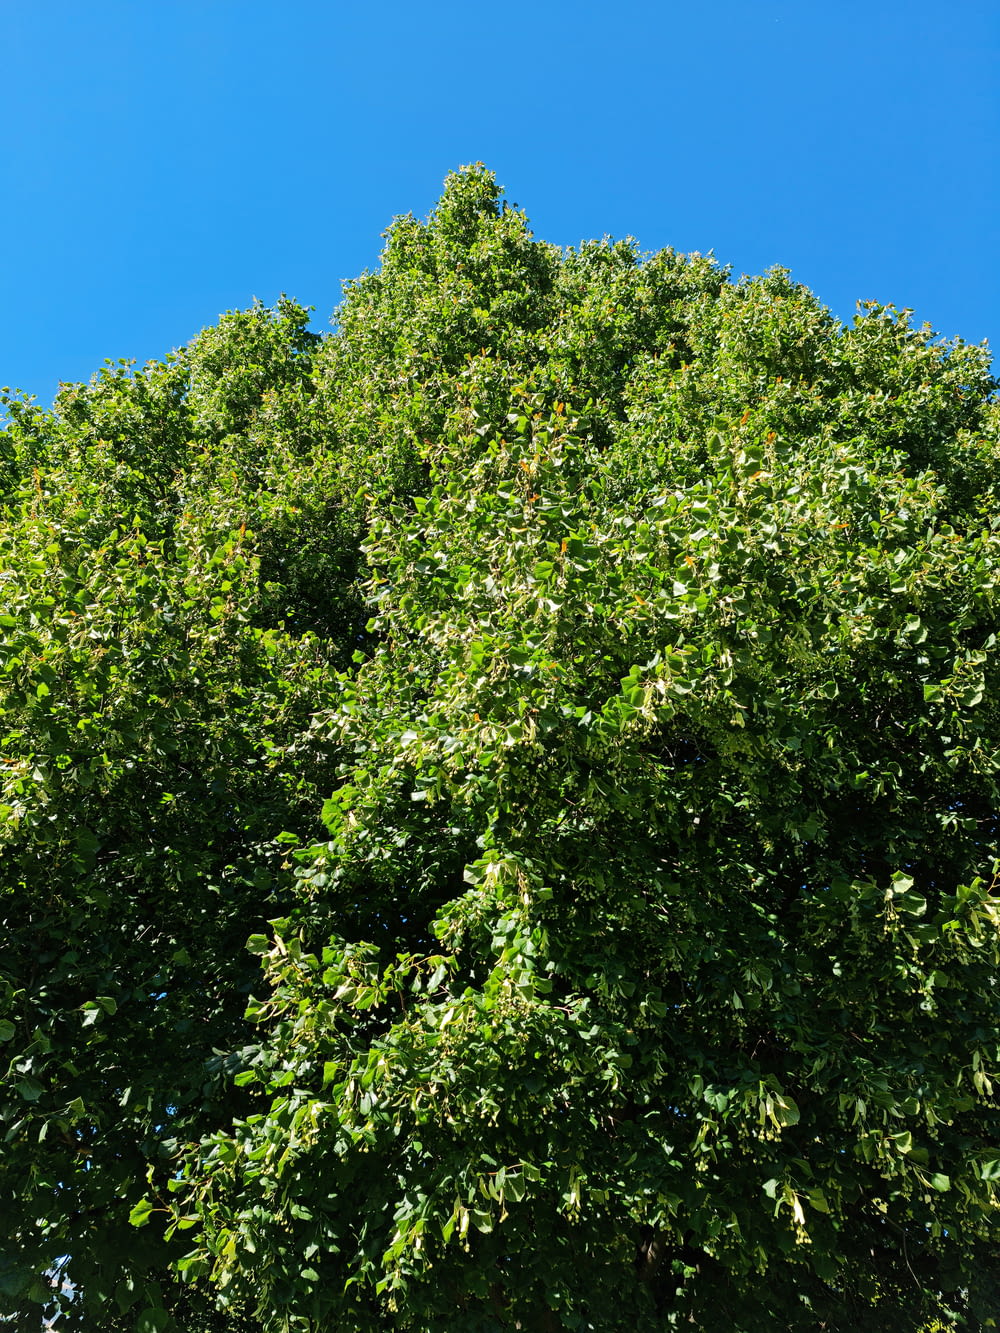 a large green tree in front of a blue sky